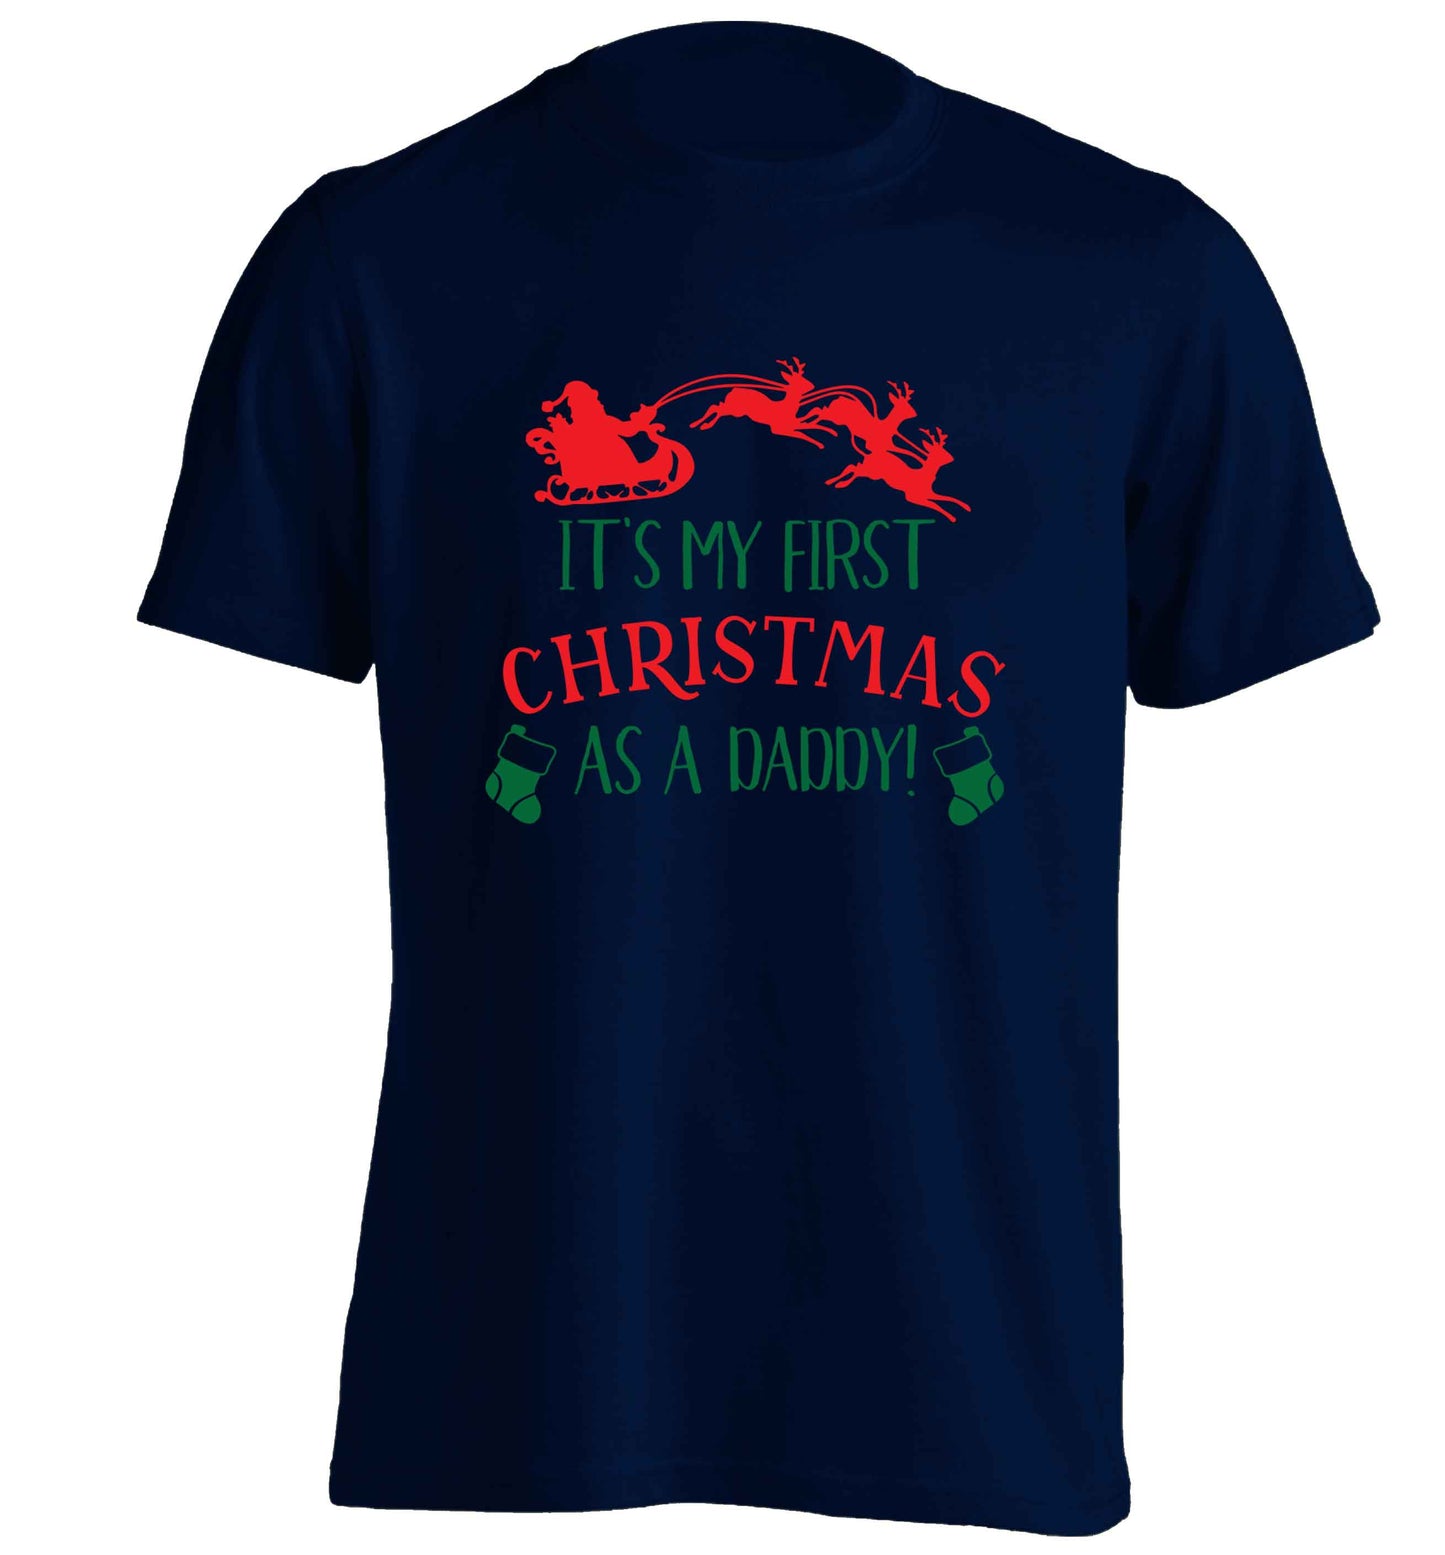 It's my first Christmas as a daddy adults unisex navy Tshirt 2XL